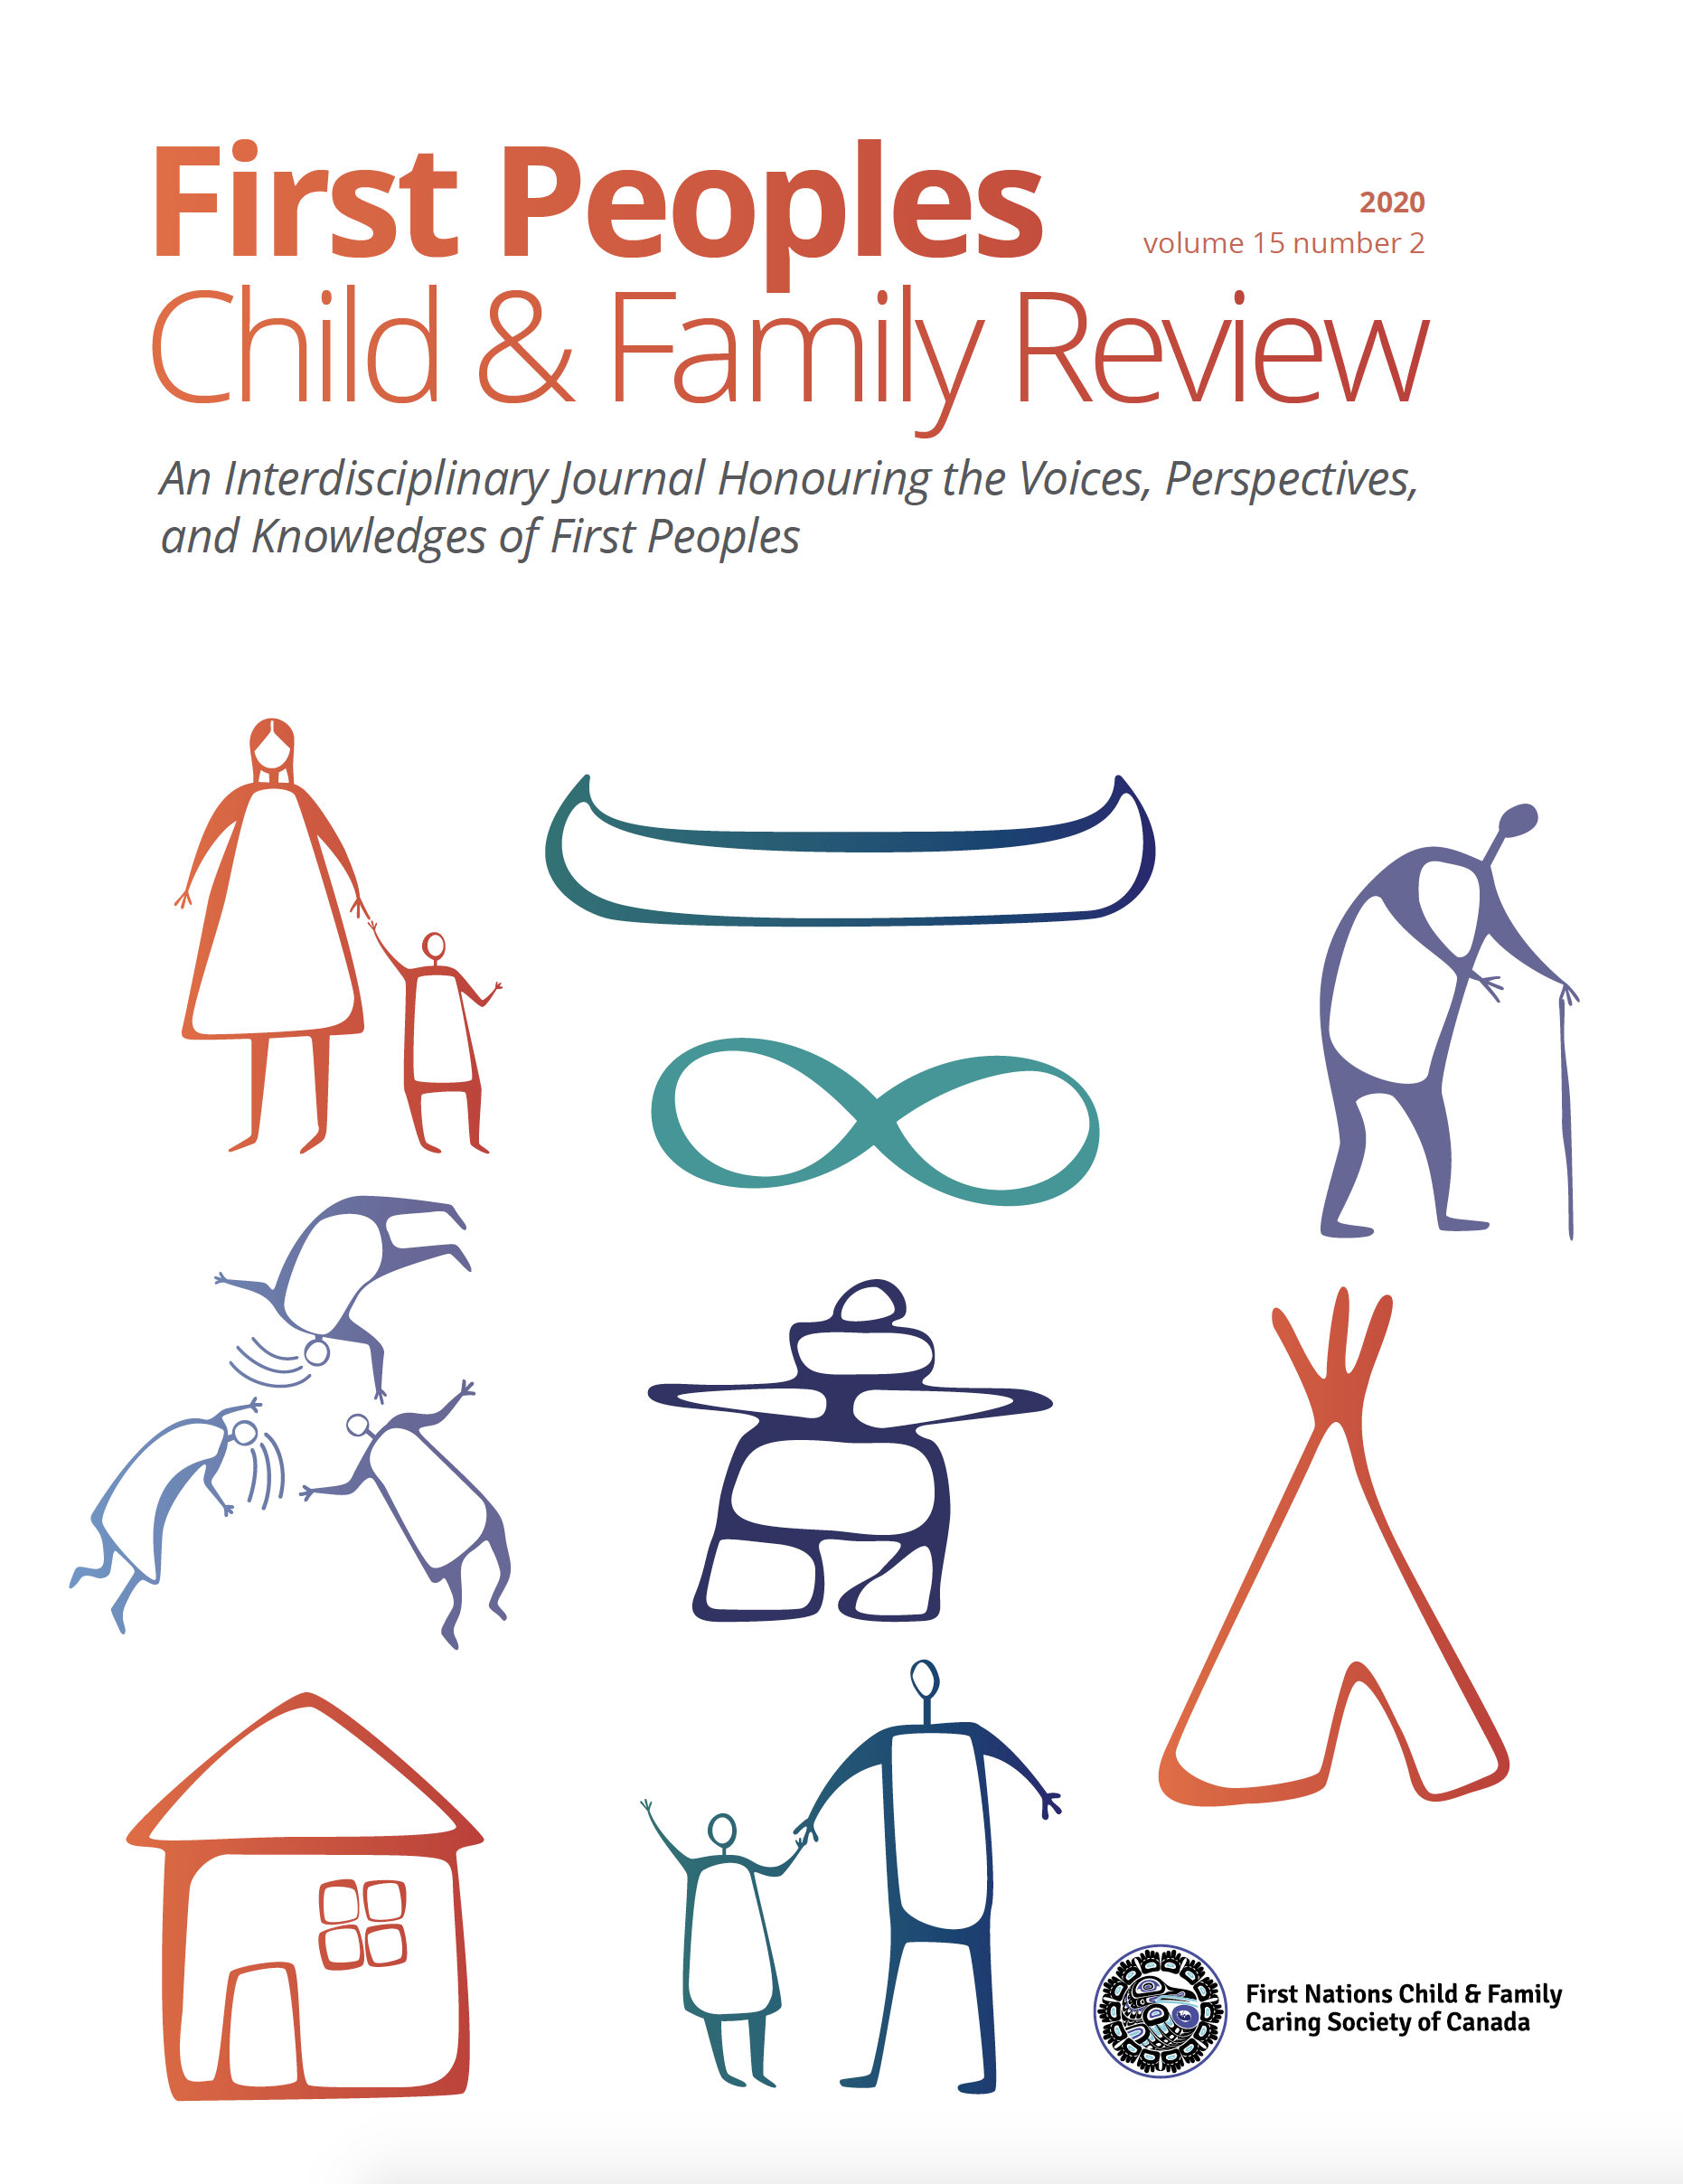 Volume 15, Issue 2 (2020) of the First Peoples Child & Family Review